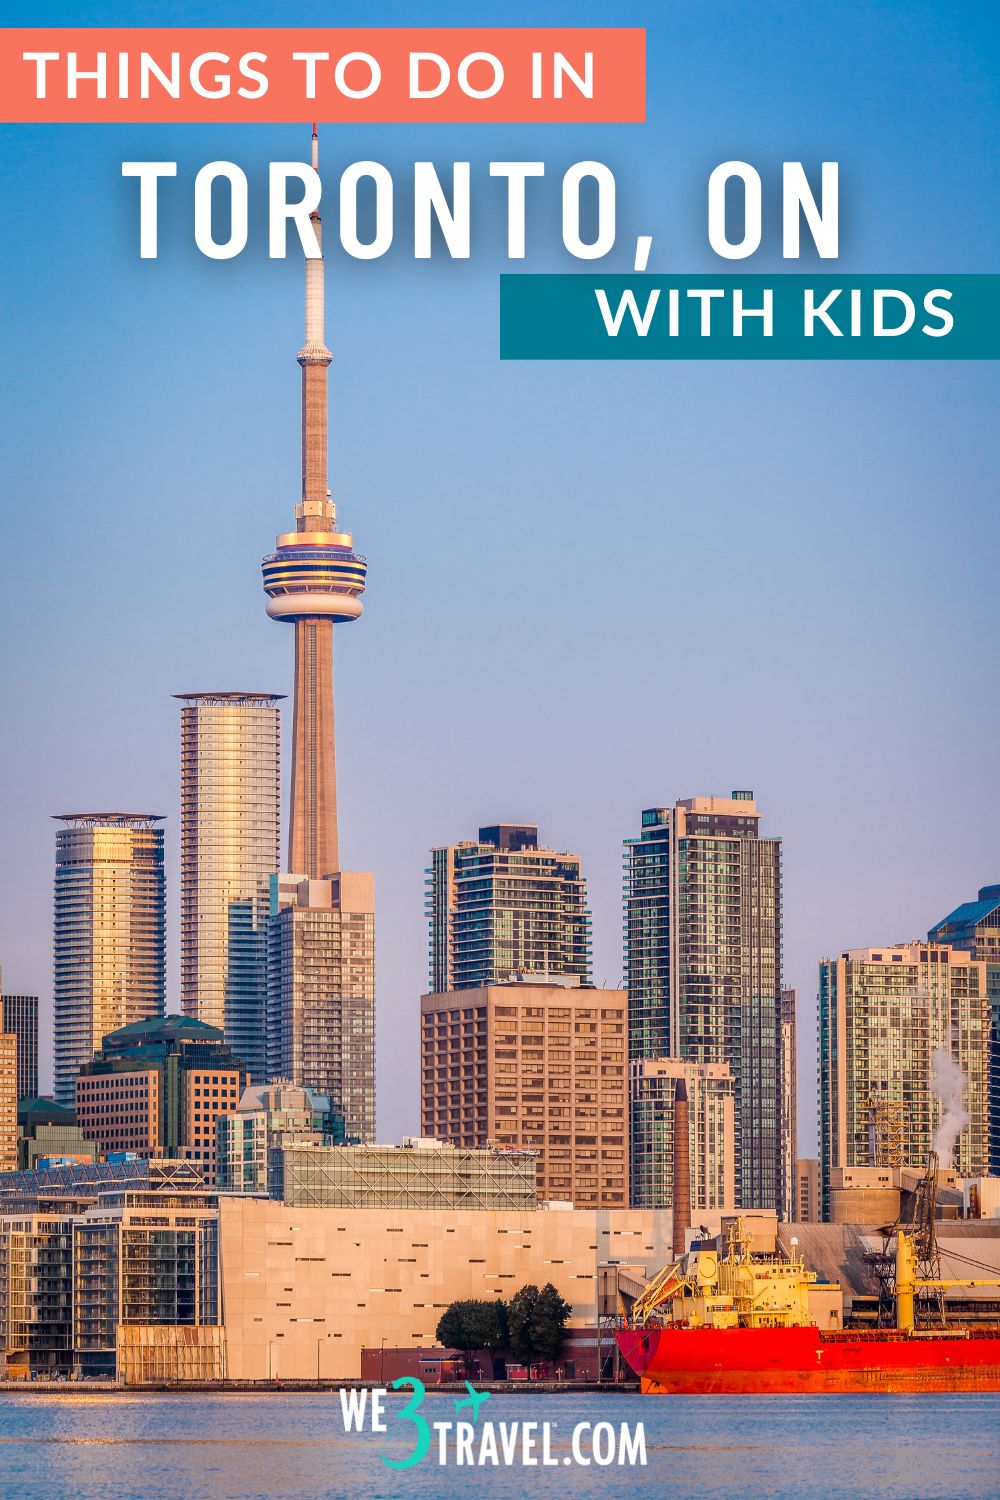 If you are visiting Toronto with kids on a family vacation to Canada, here are the top things to do and family-friendly attractions in Canada's biggest city!